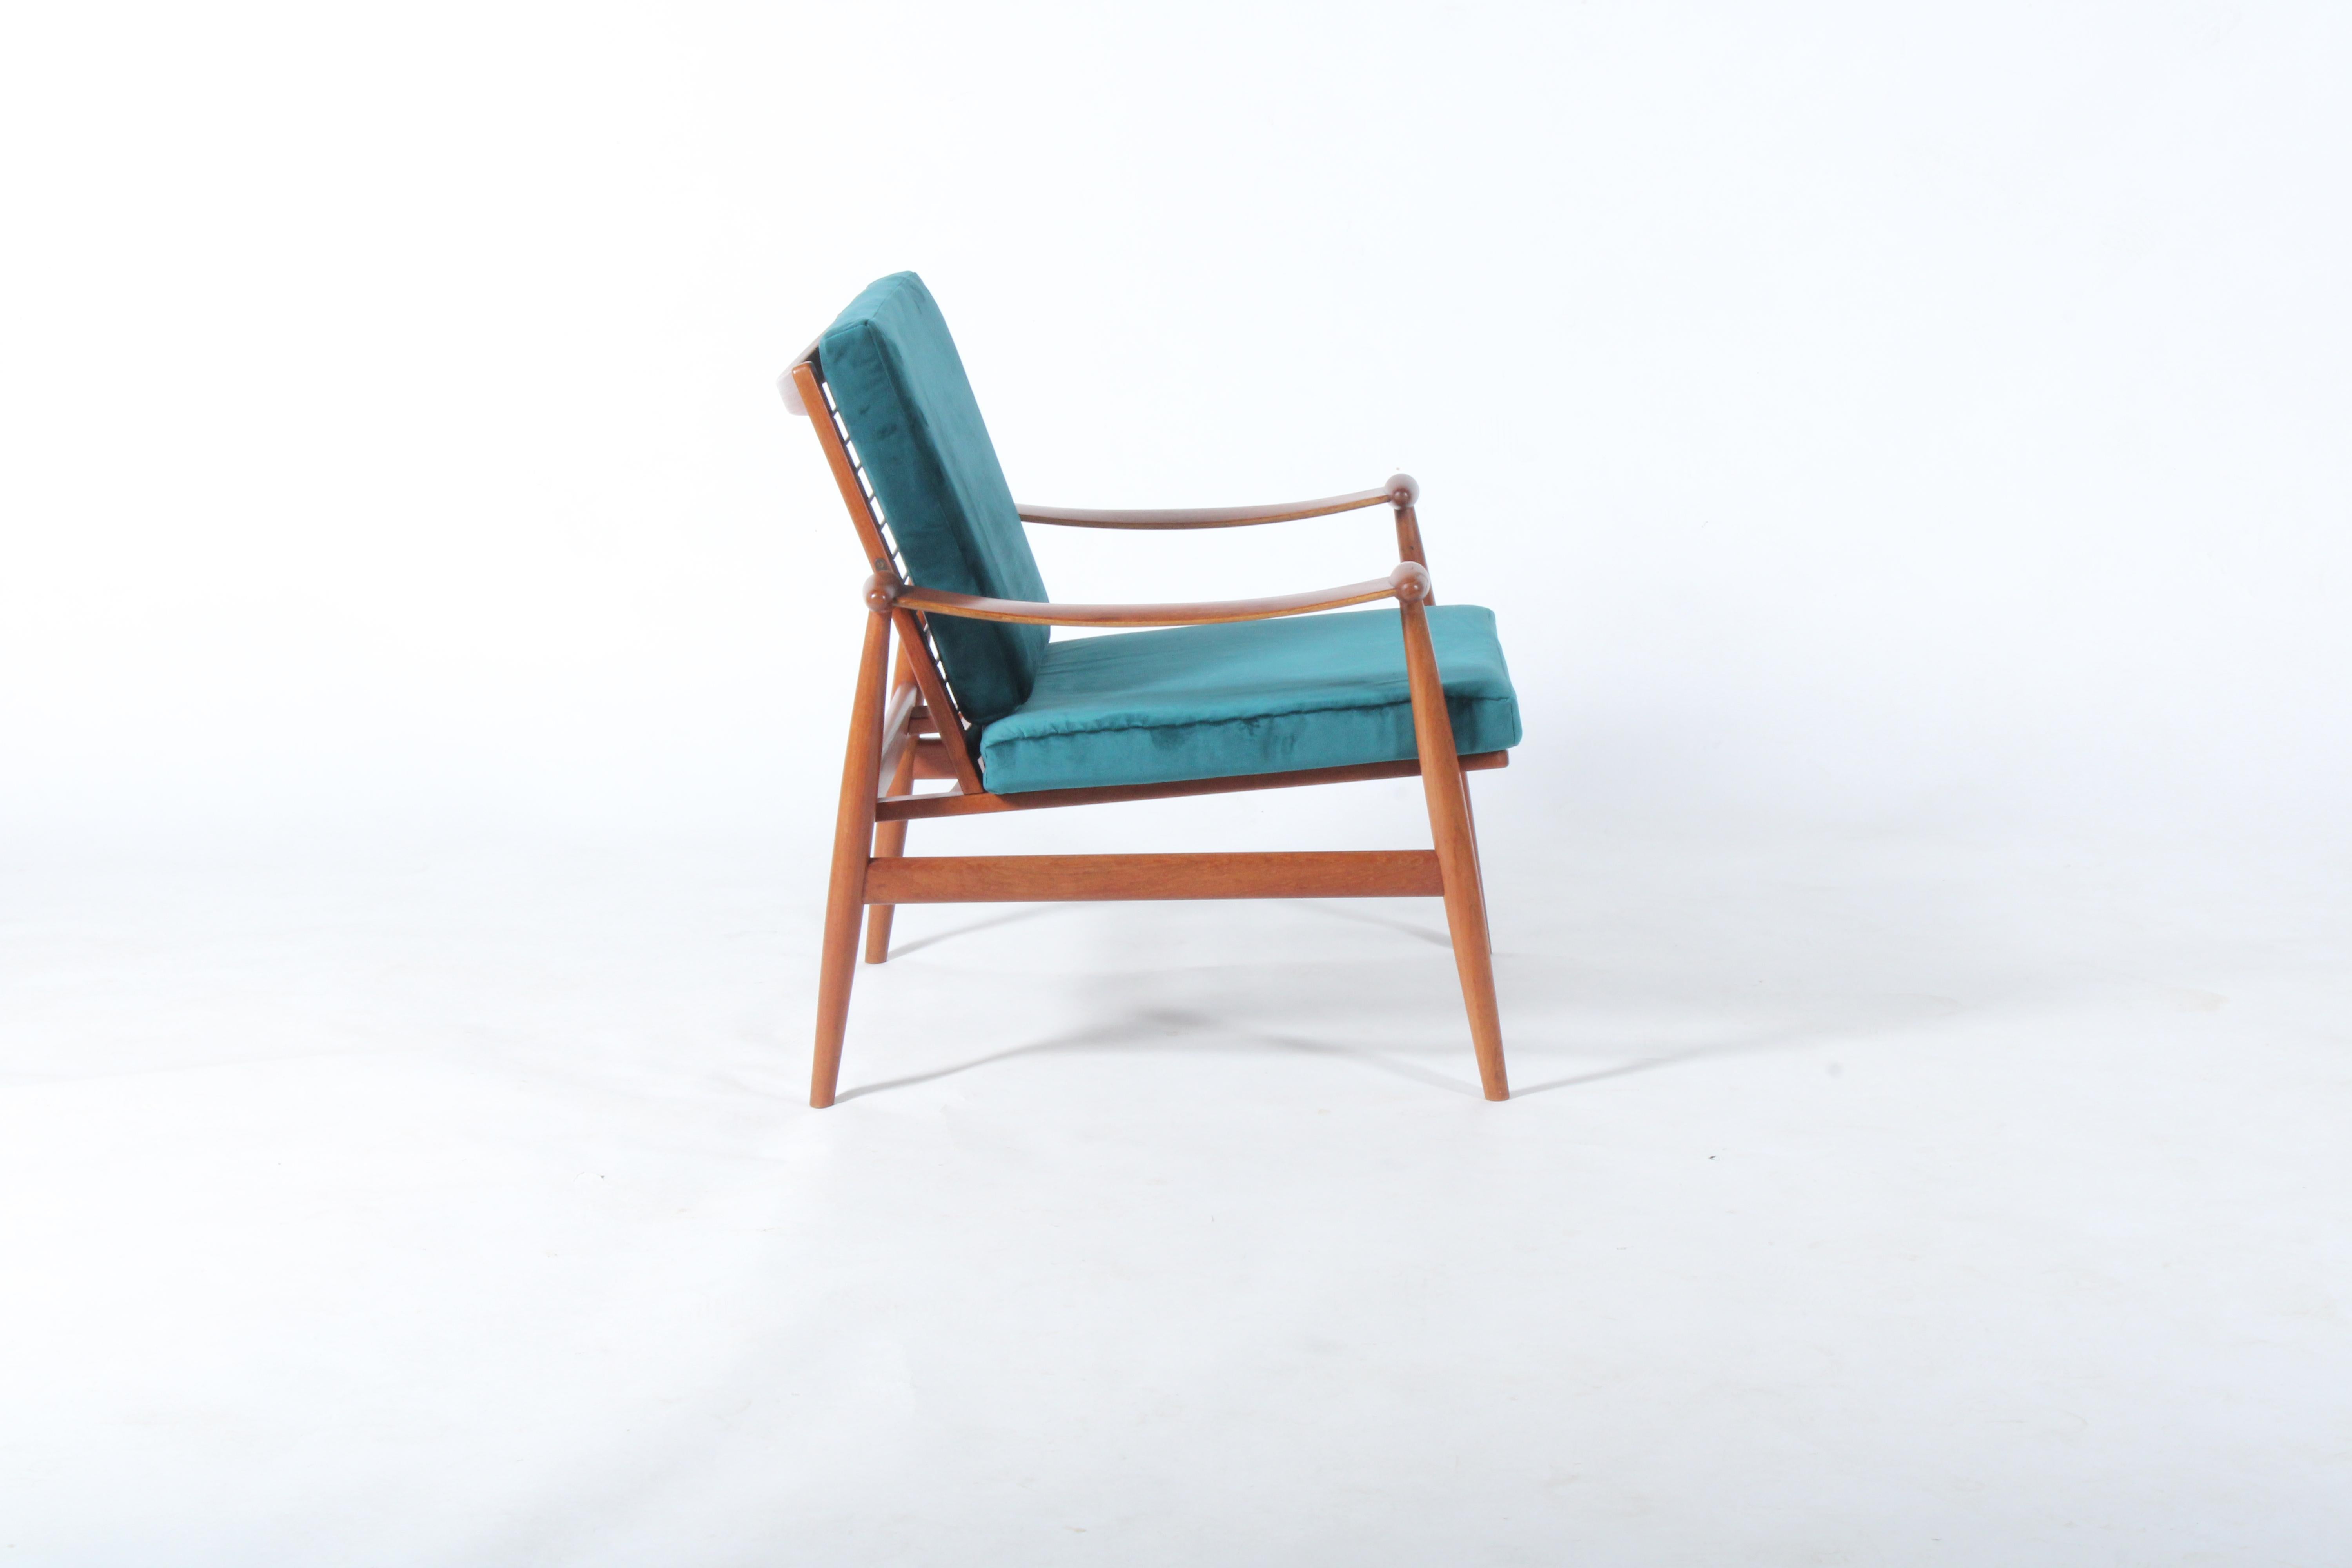 Exquisite Mid Century Danish Spade Chair By Finn Juhl For France & Son In Teak In Good Condition For Sale In Portlaoise, IE